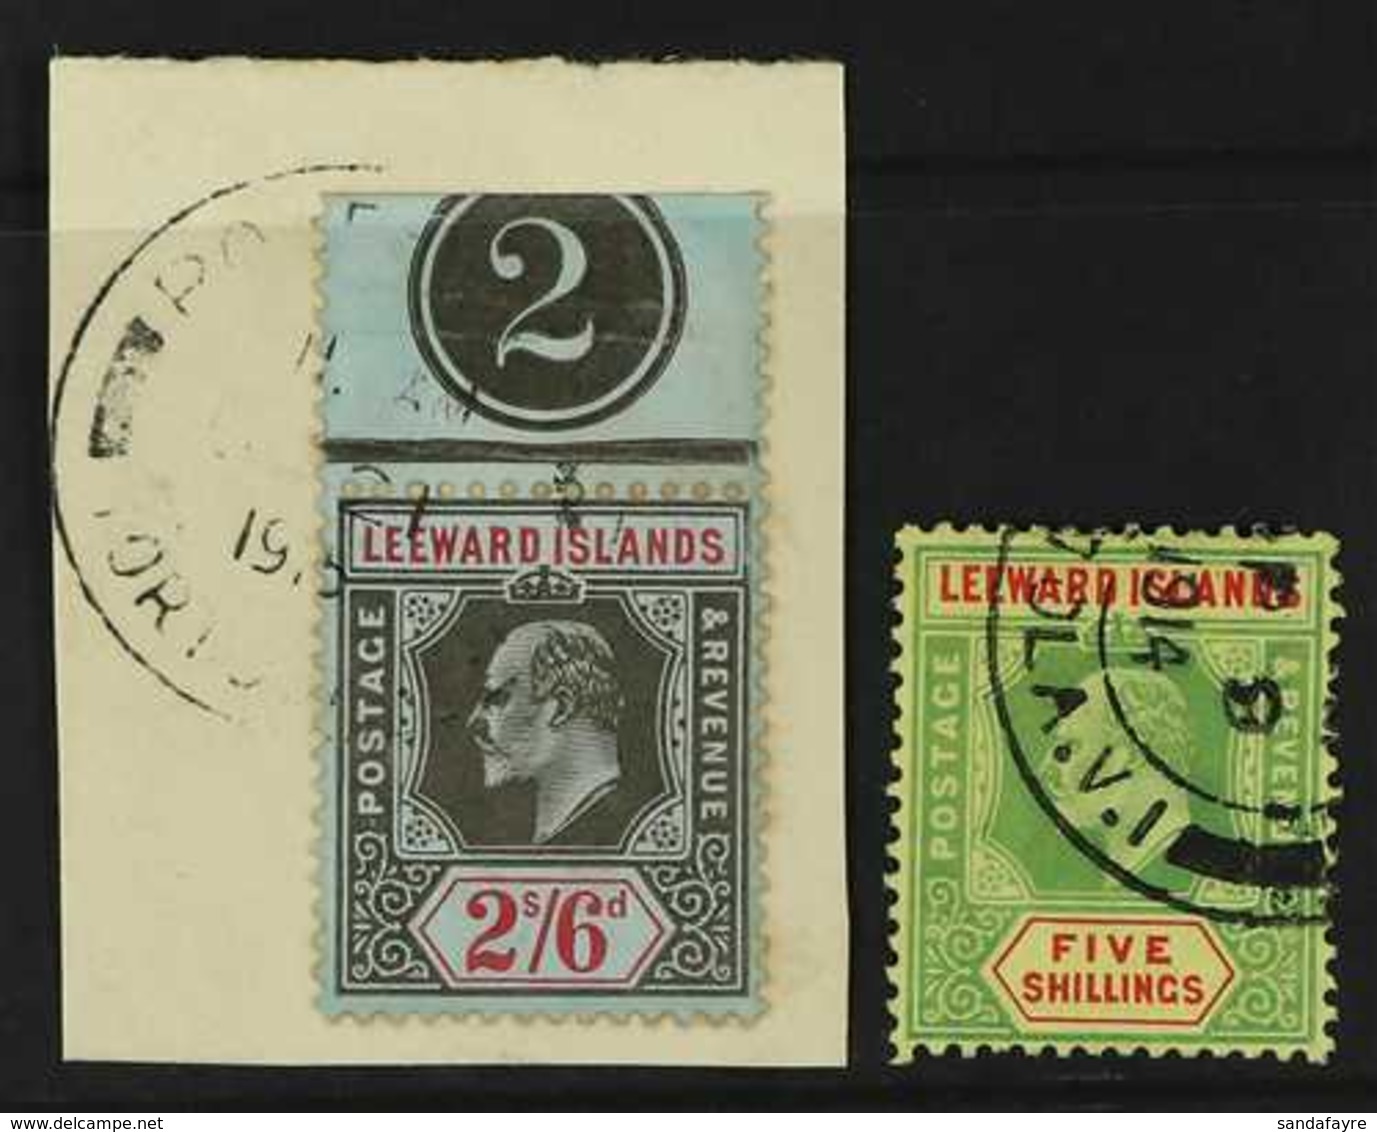 1907-11 2s6d And 5s., SG 44/45, Each With Clear Part Virgin Islands Cds's, The 2s6d With Marginal Plate Number "2" On A  - Leeward  Islands